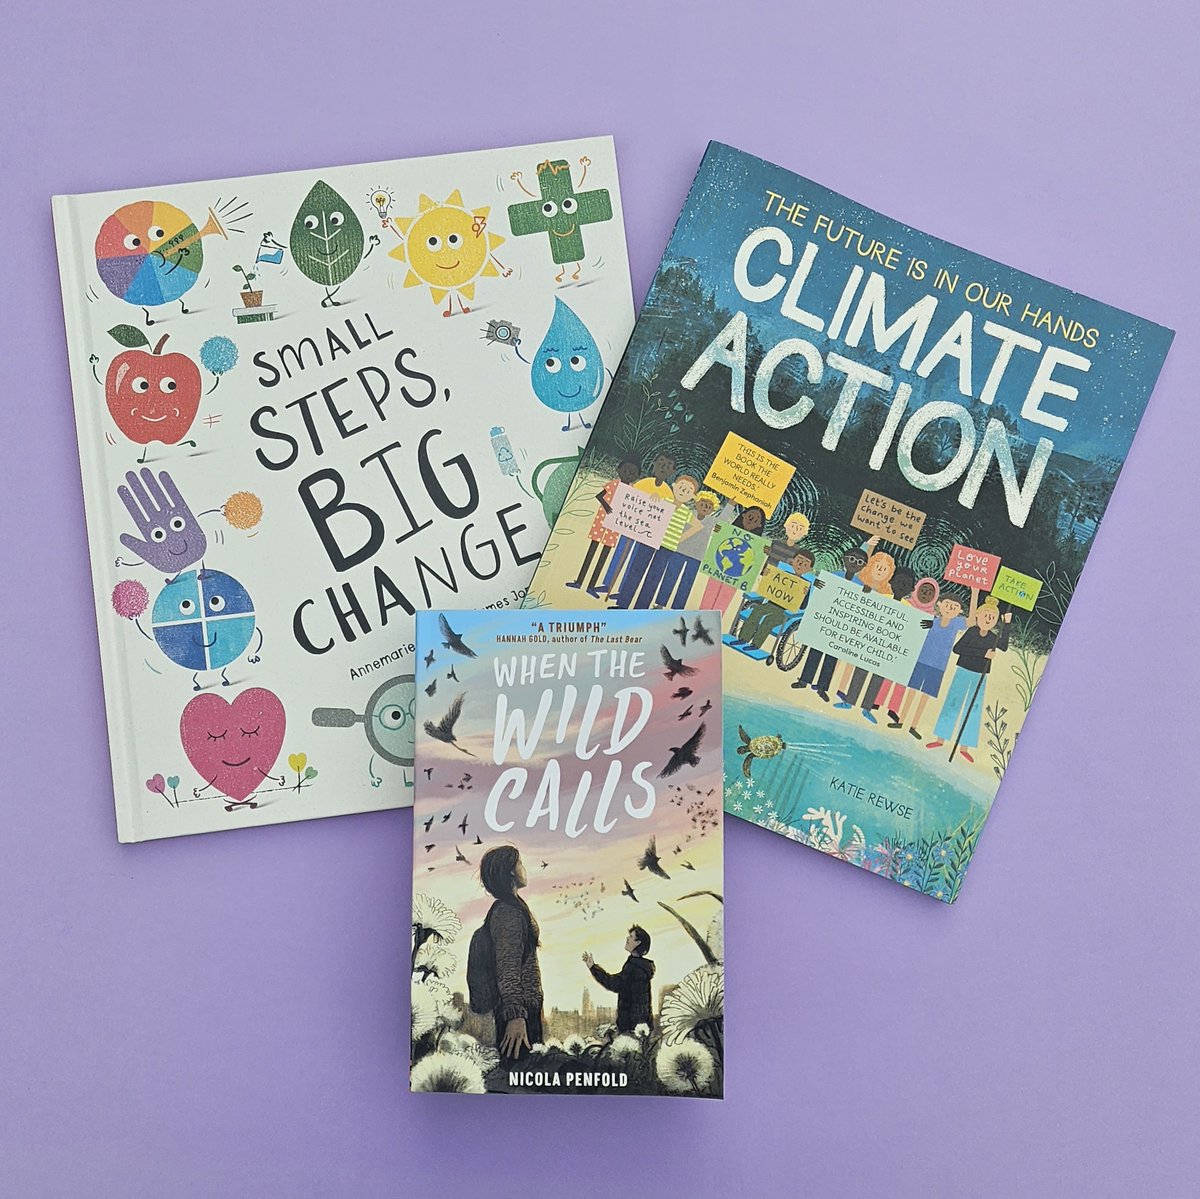 Celebrate Earth Day with these amazing books! 📚 💧Small Steps, Big Change by @JamesPaulJones 🌎 Climate Action by @GeorginaStevens & @katierewse 🌿 When the Wild Calls by @nicolapenfold #earthday #childrensbooks #climatechange @bouncemarketing #edutwitter